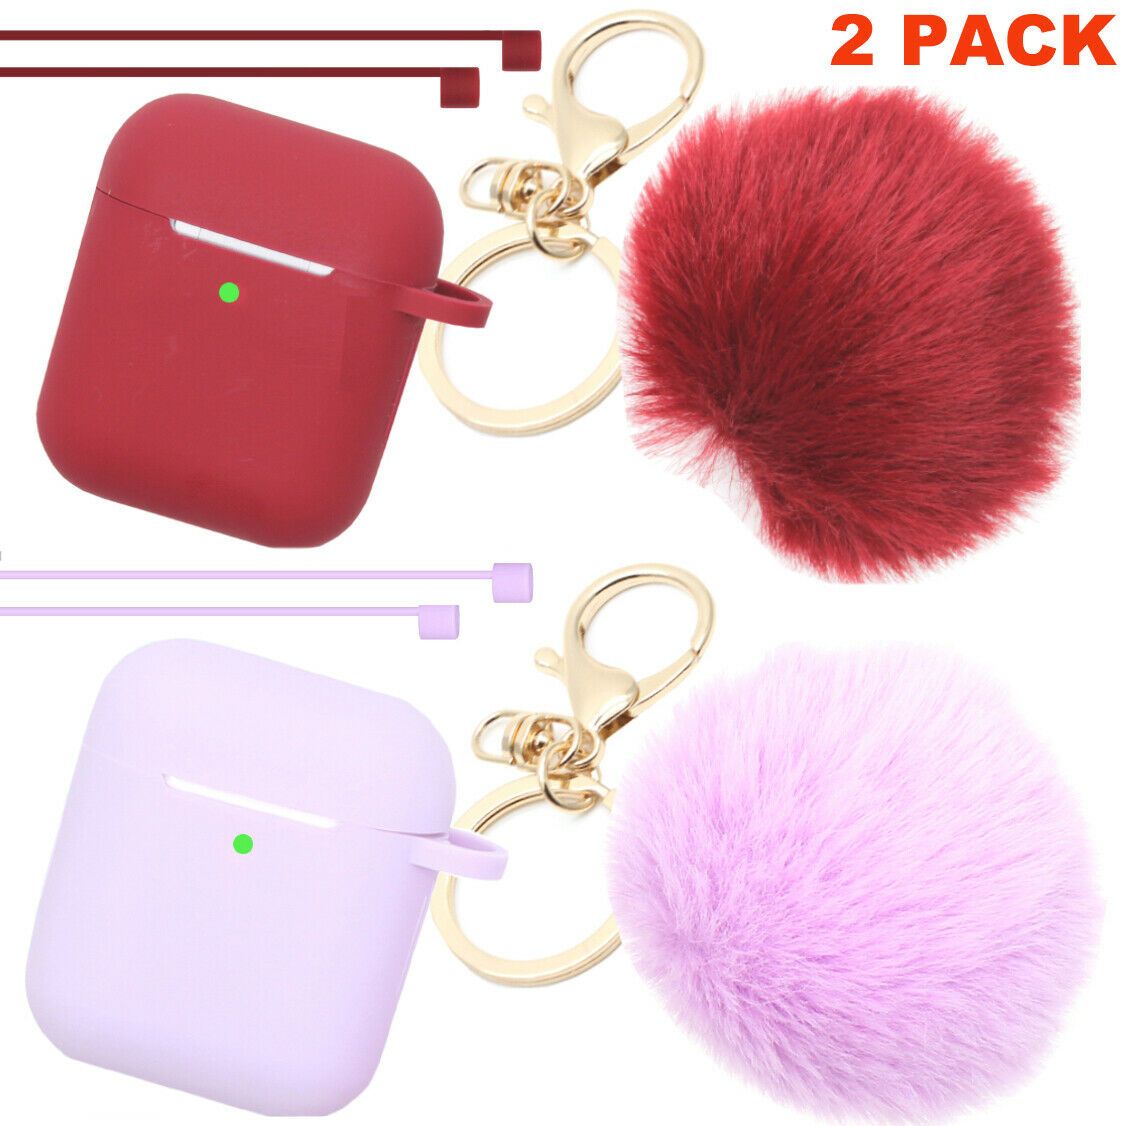 Cute Airpods Silicone Case Cover w/Fur Ball Keychain Strap for Apple Airpods 1/2 ervin.accessories Burgundy+Purple(2 Pack) 